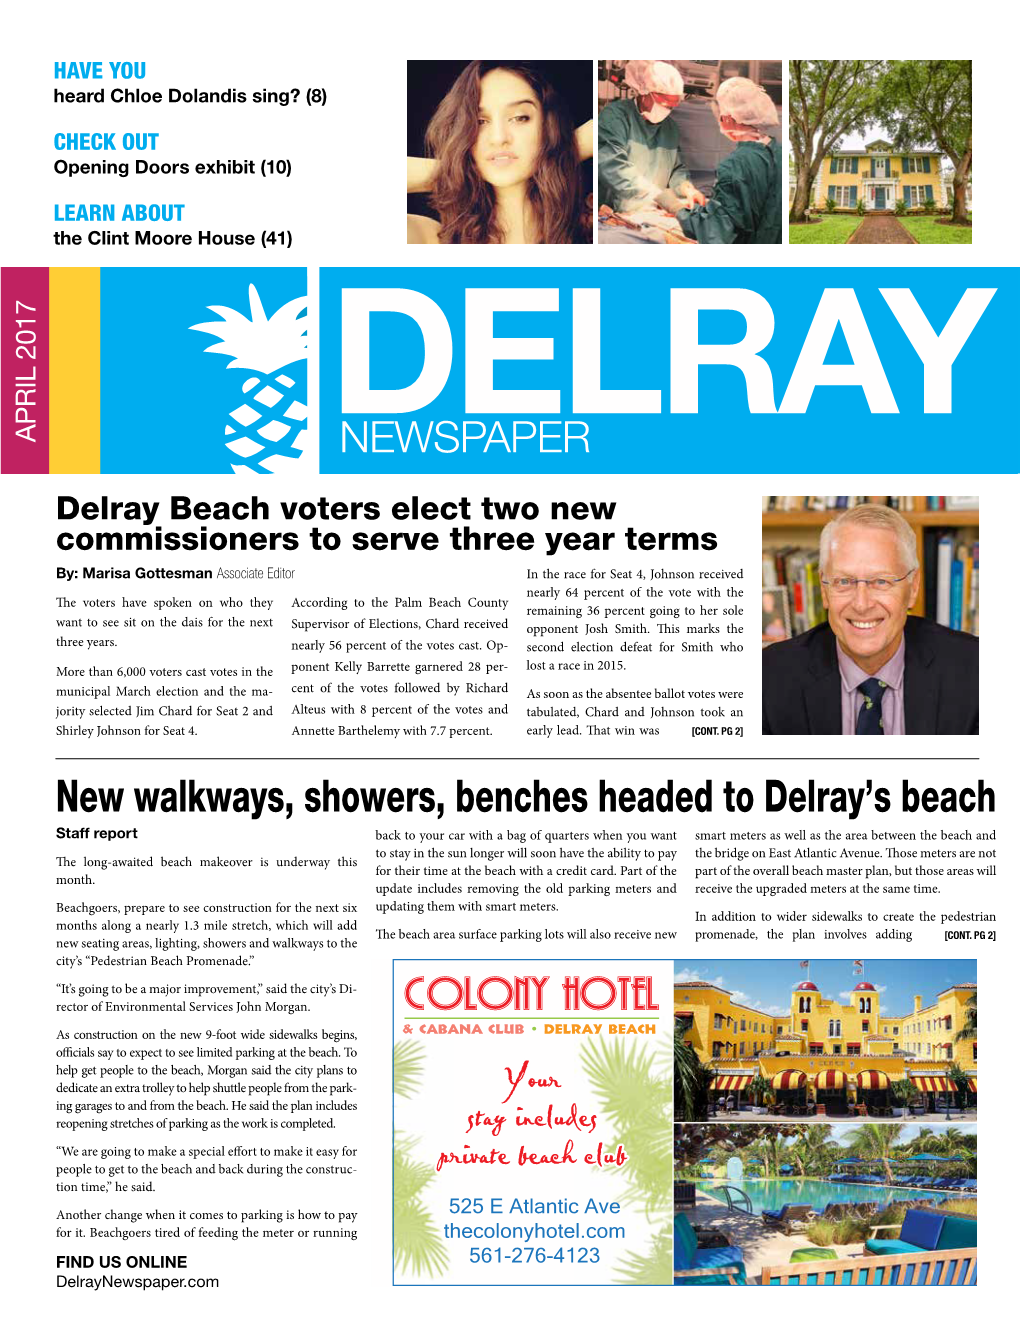 New Walkways, Showers, Benches Headed to Delray's Beach